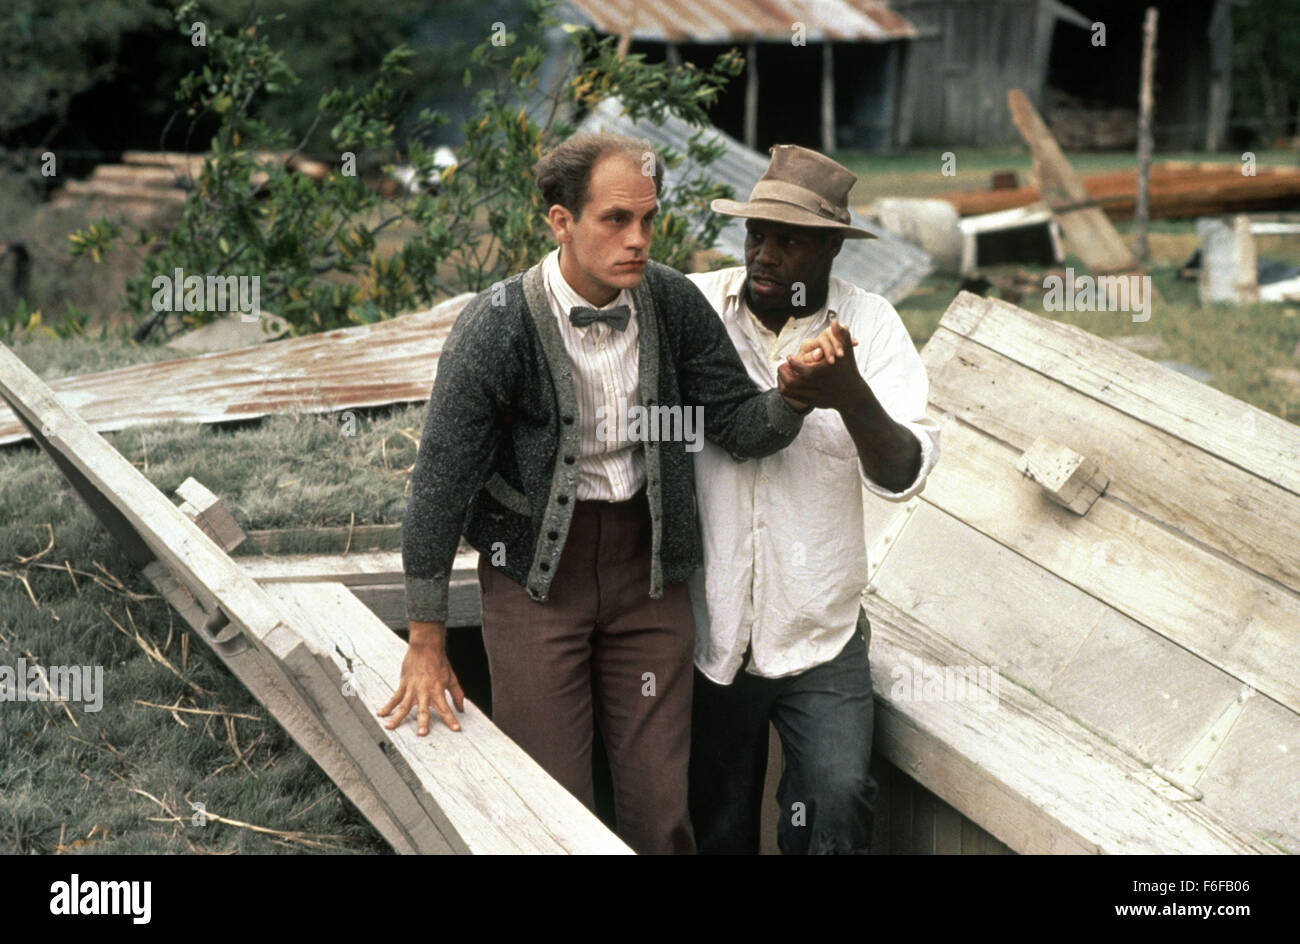 Sep 15, 1984; Hollywood, CA, USA;  JOHN MALKOVICH (Left) and DANNY GLOVER (Right) star as Mr. Will and Moze in the drama 'Places in the Heart' directed by Robert Benton. Stock Photo